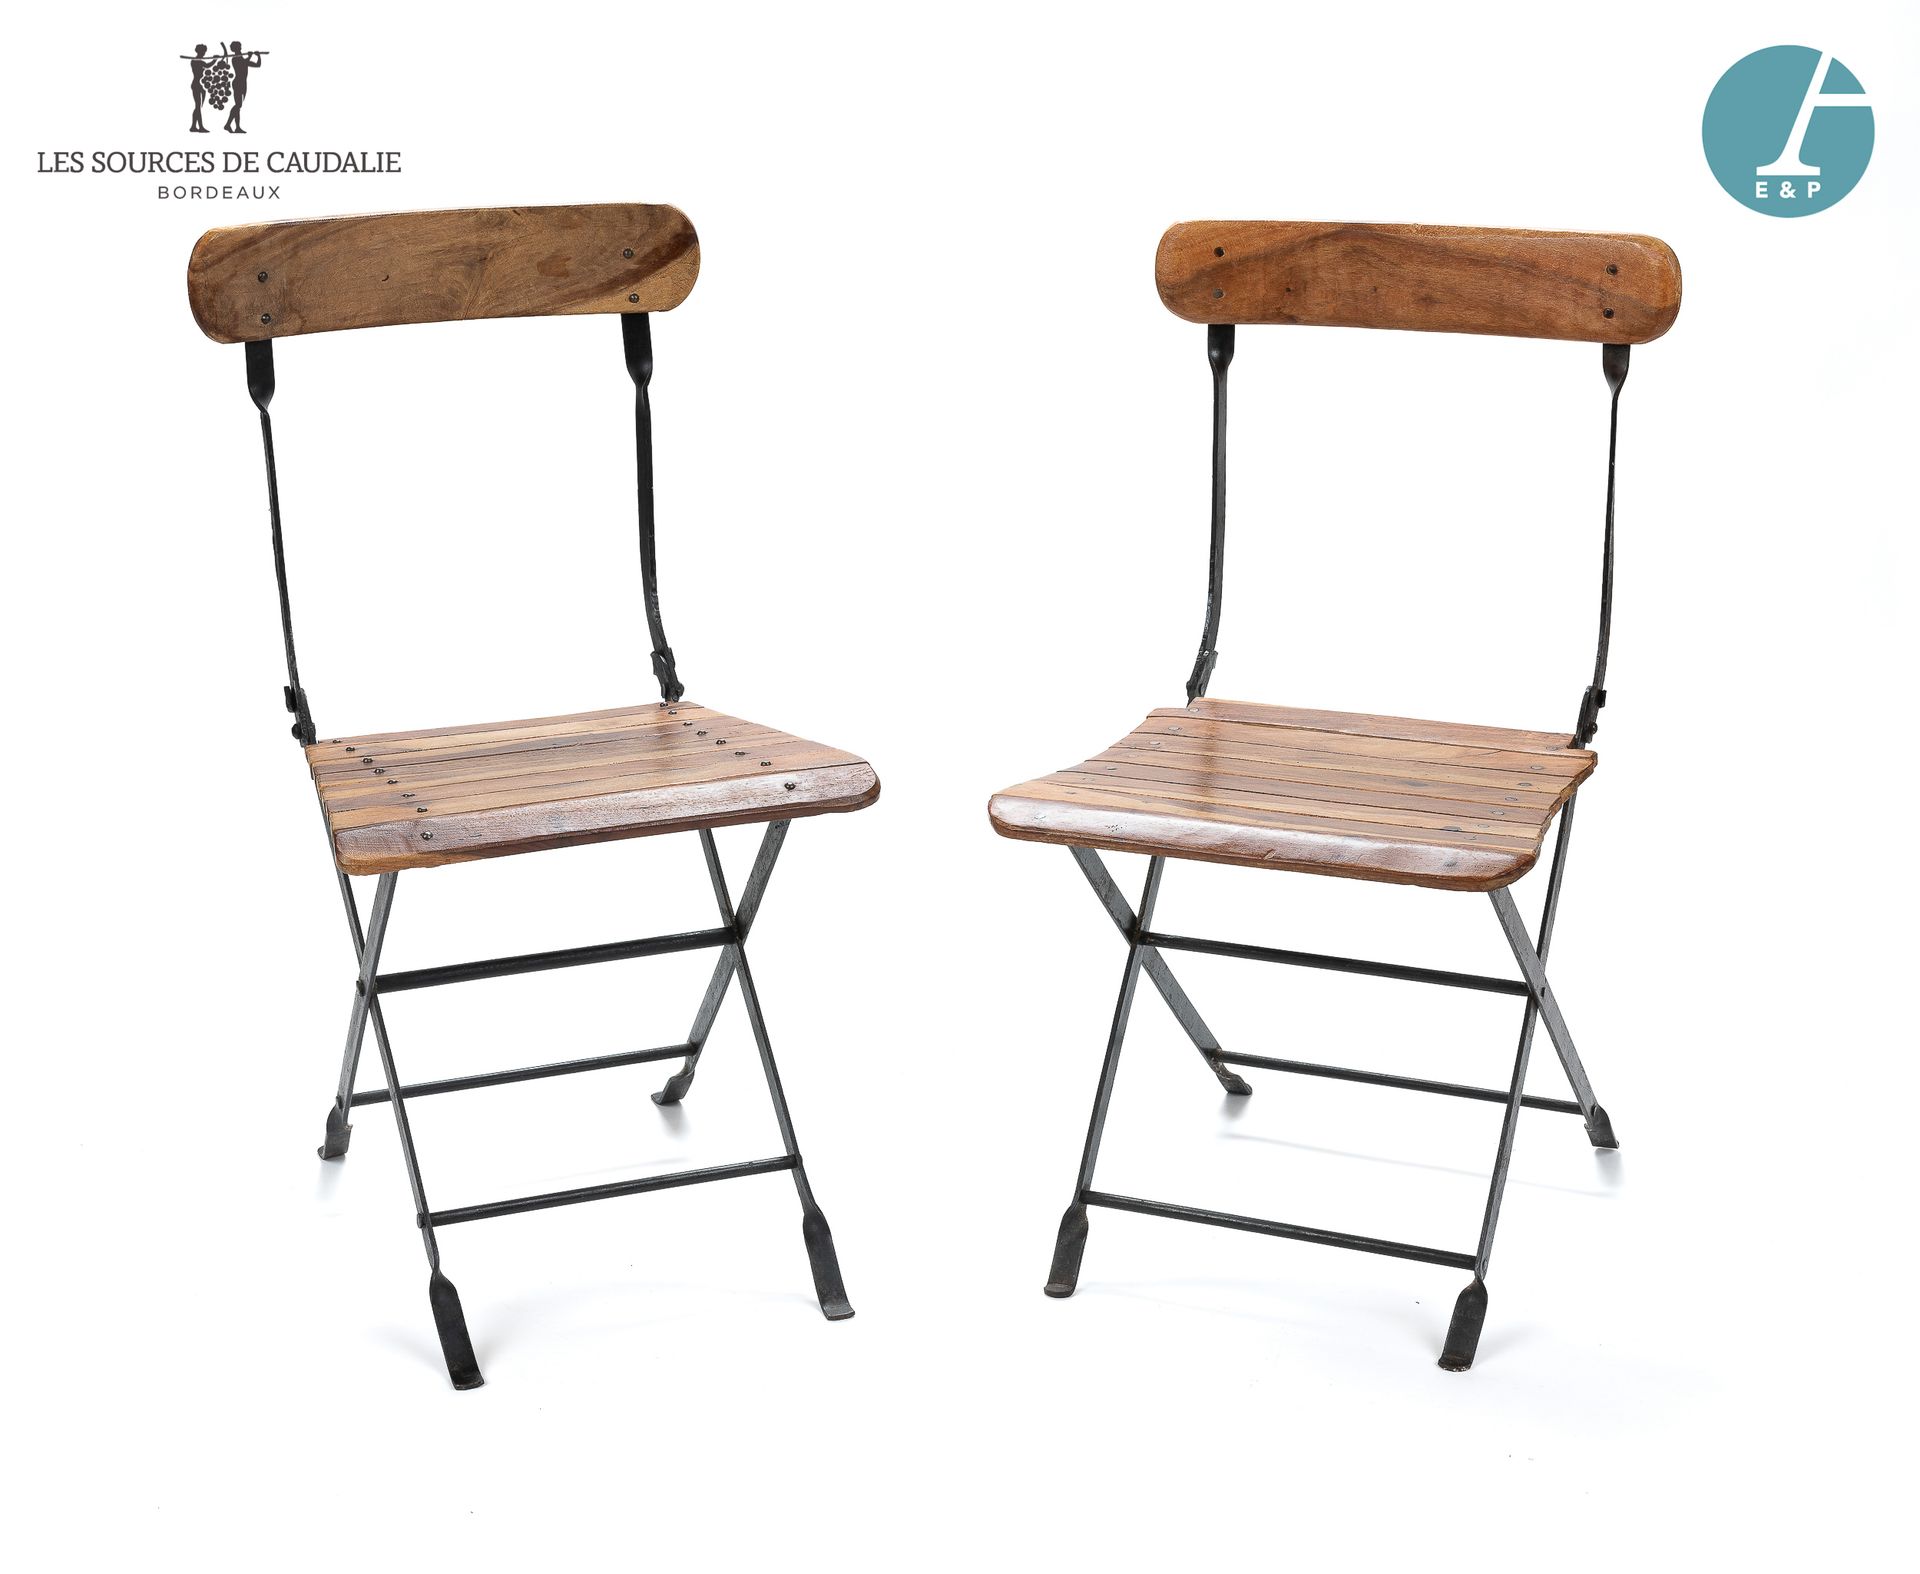 Null From Room #5 "Le Tonnelier

Pair of folding chairs in wrought iron and natu&hellip;